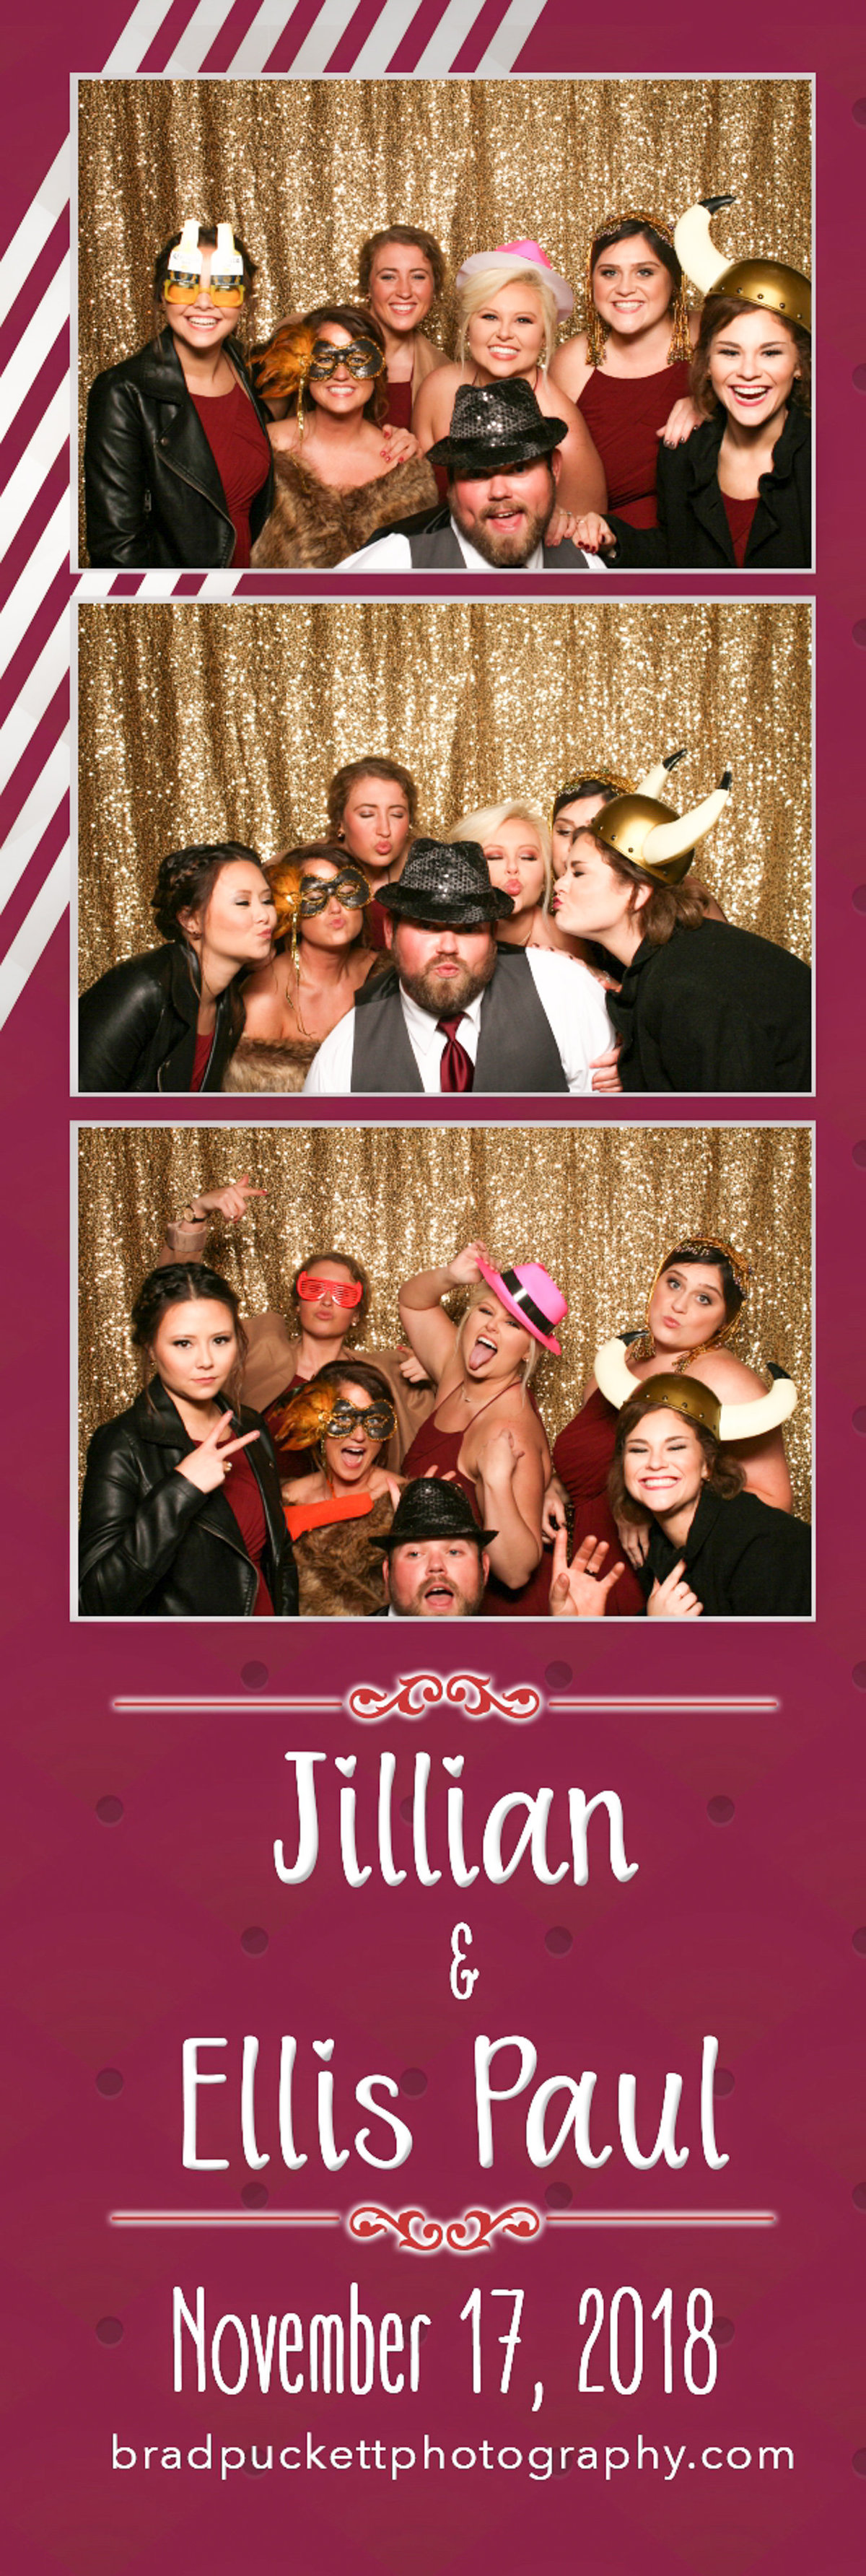 Jillian and Ellis Paul Rodgers photo booth rental at their wedding reception at Triple T Farms in Fruitdale, Alabama.